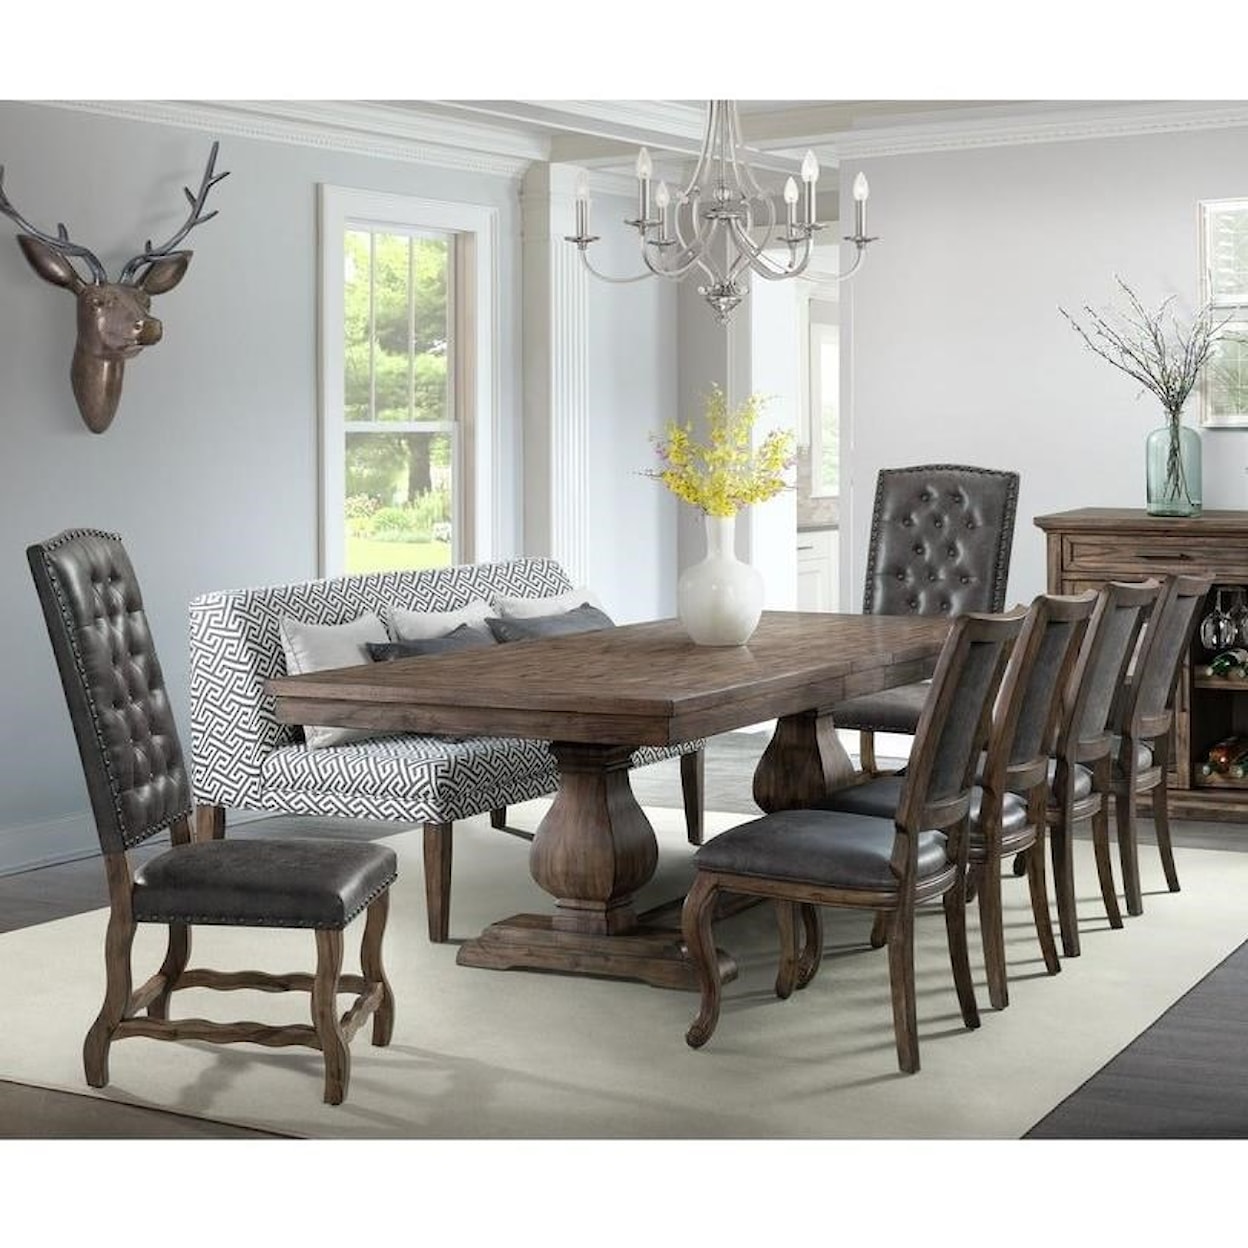 Elements International Gramercy 8-Piece Table and Chair Set with Bench